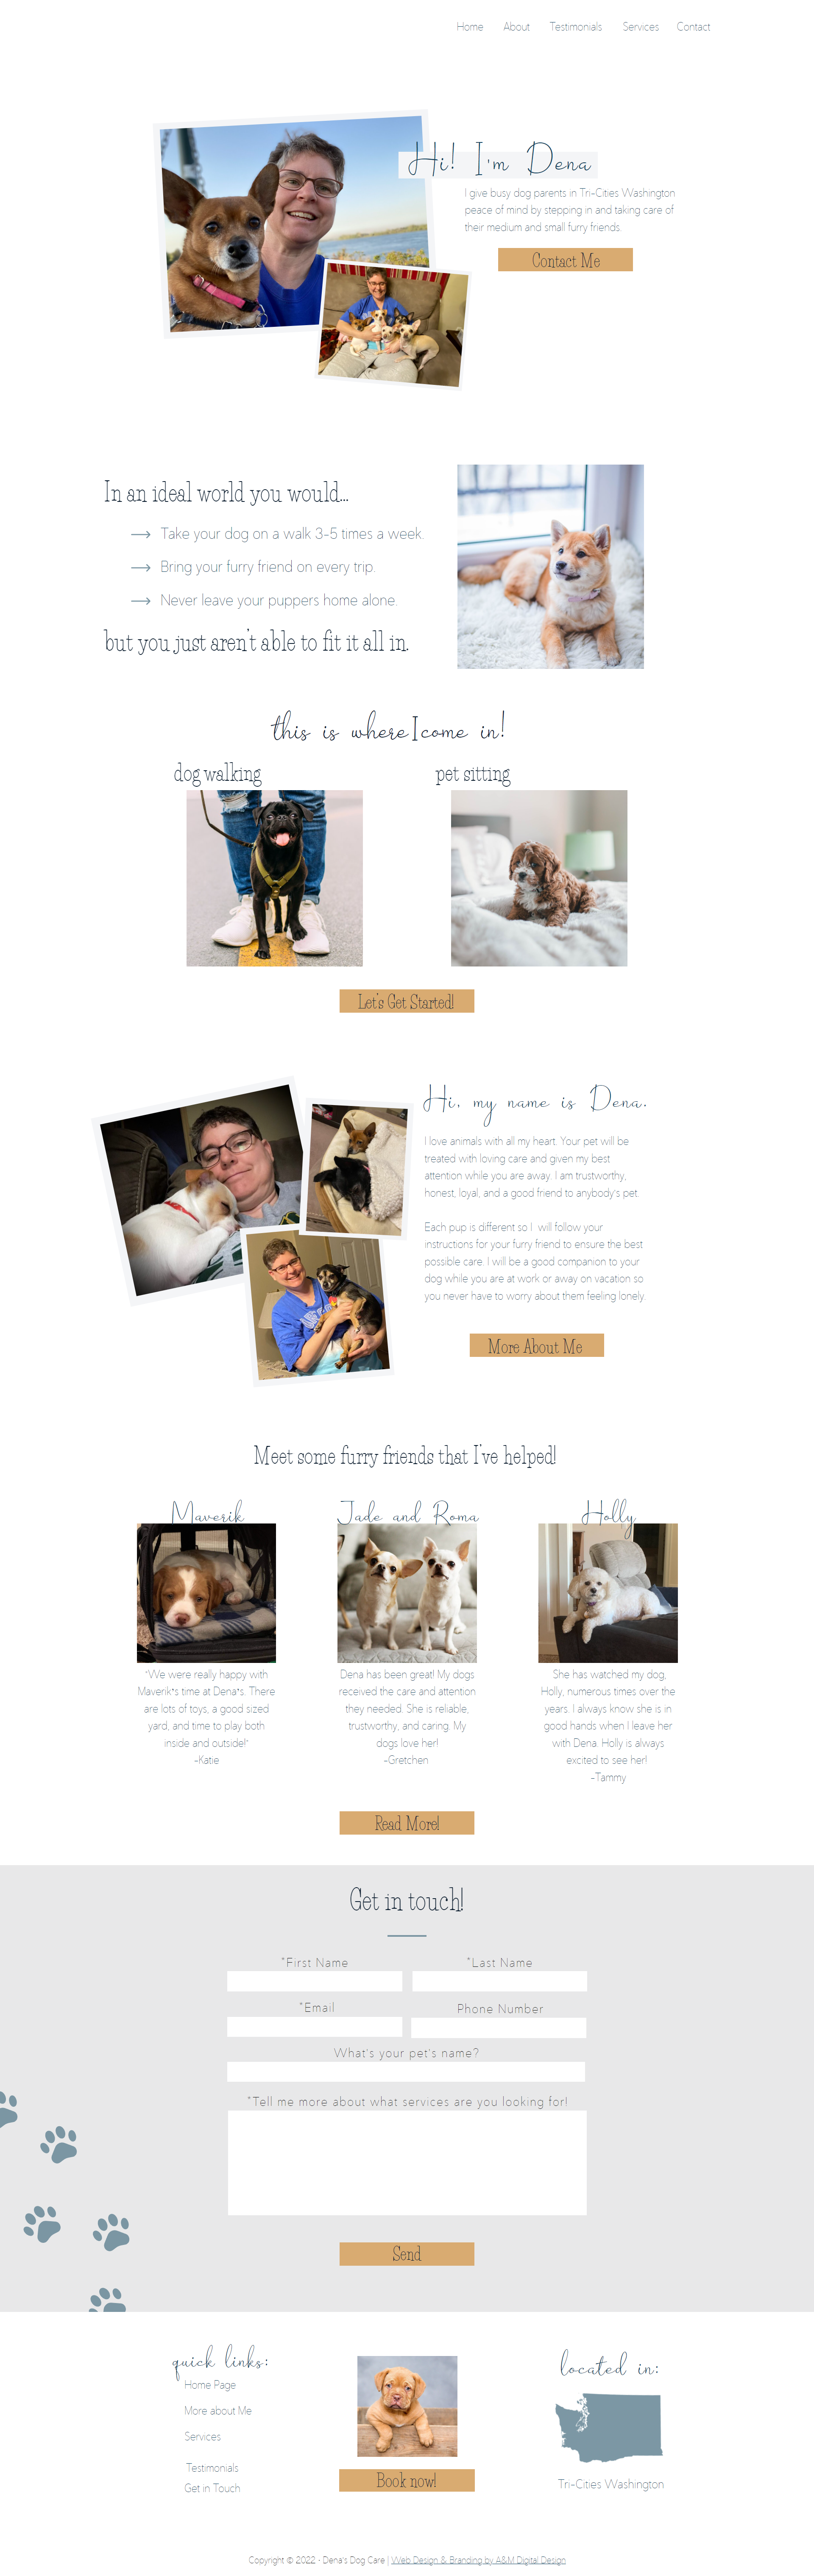 Home page for Dena's Dog Care business